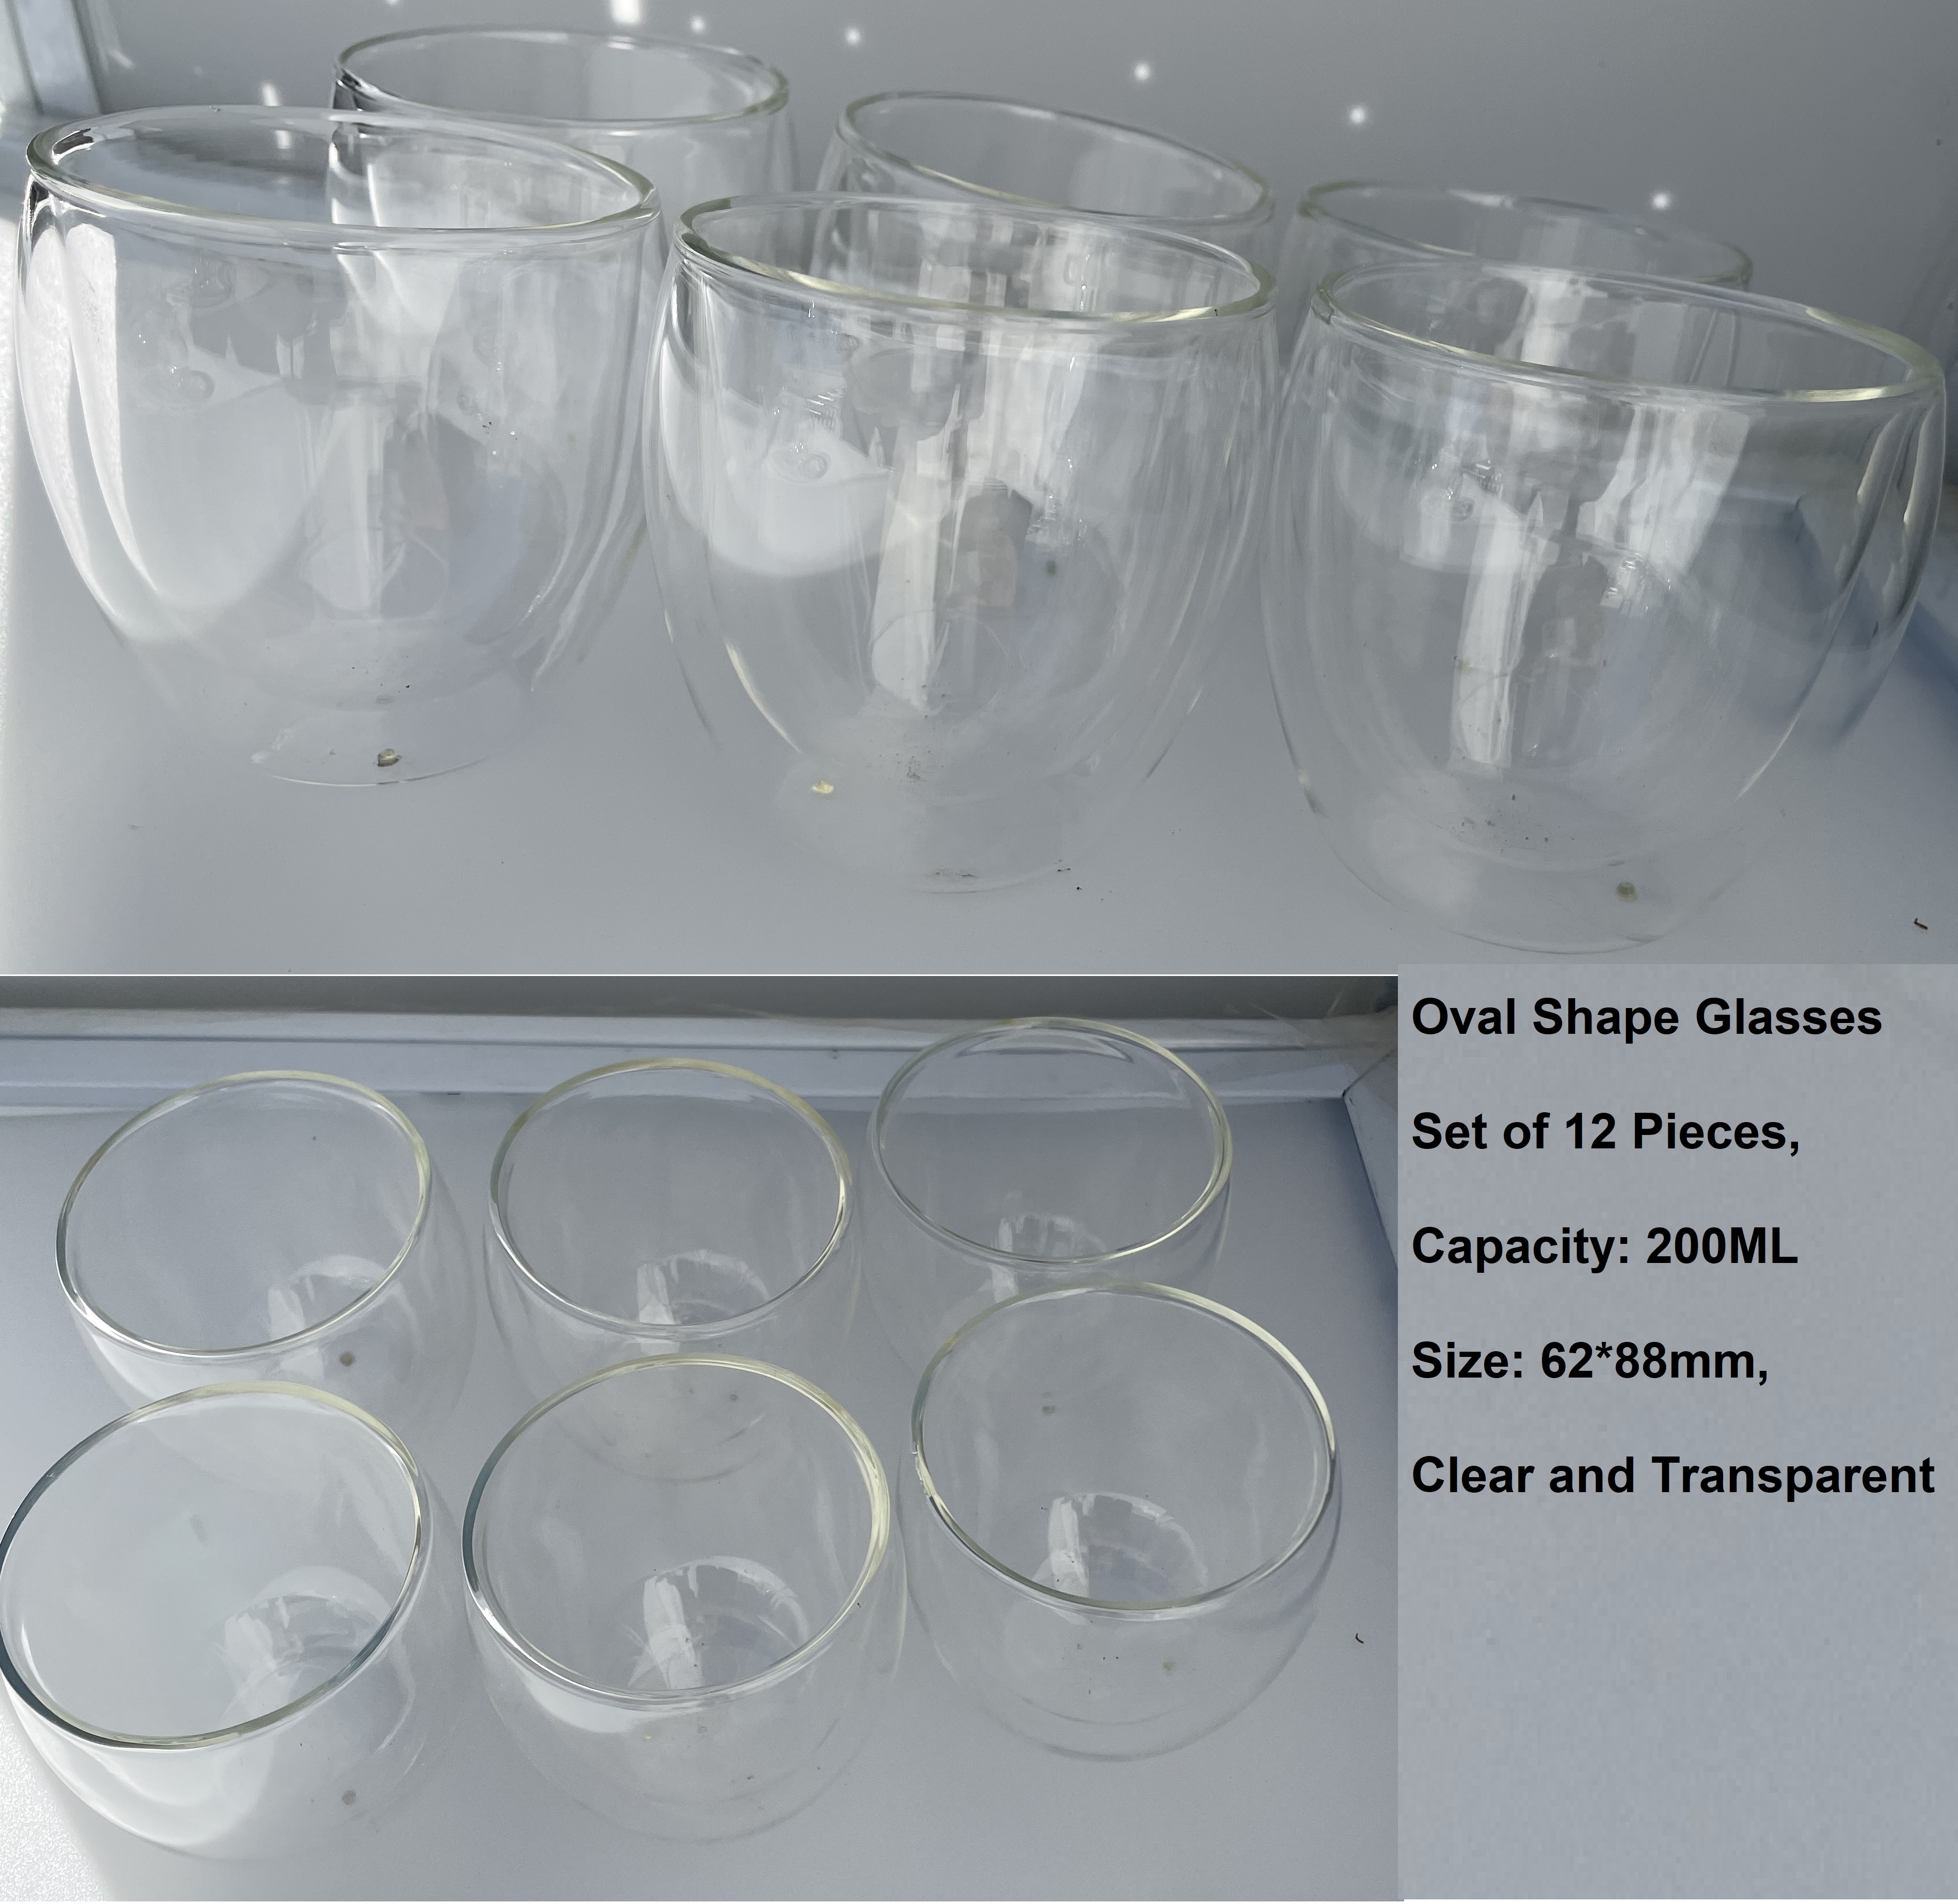 Oval Shape Glass cup set of 12 pieces, tea cup / wine glass / drink cup/ milk cup/ water cup, Capacity: 200ML Size: 62*88mm, Clear and Transparent.